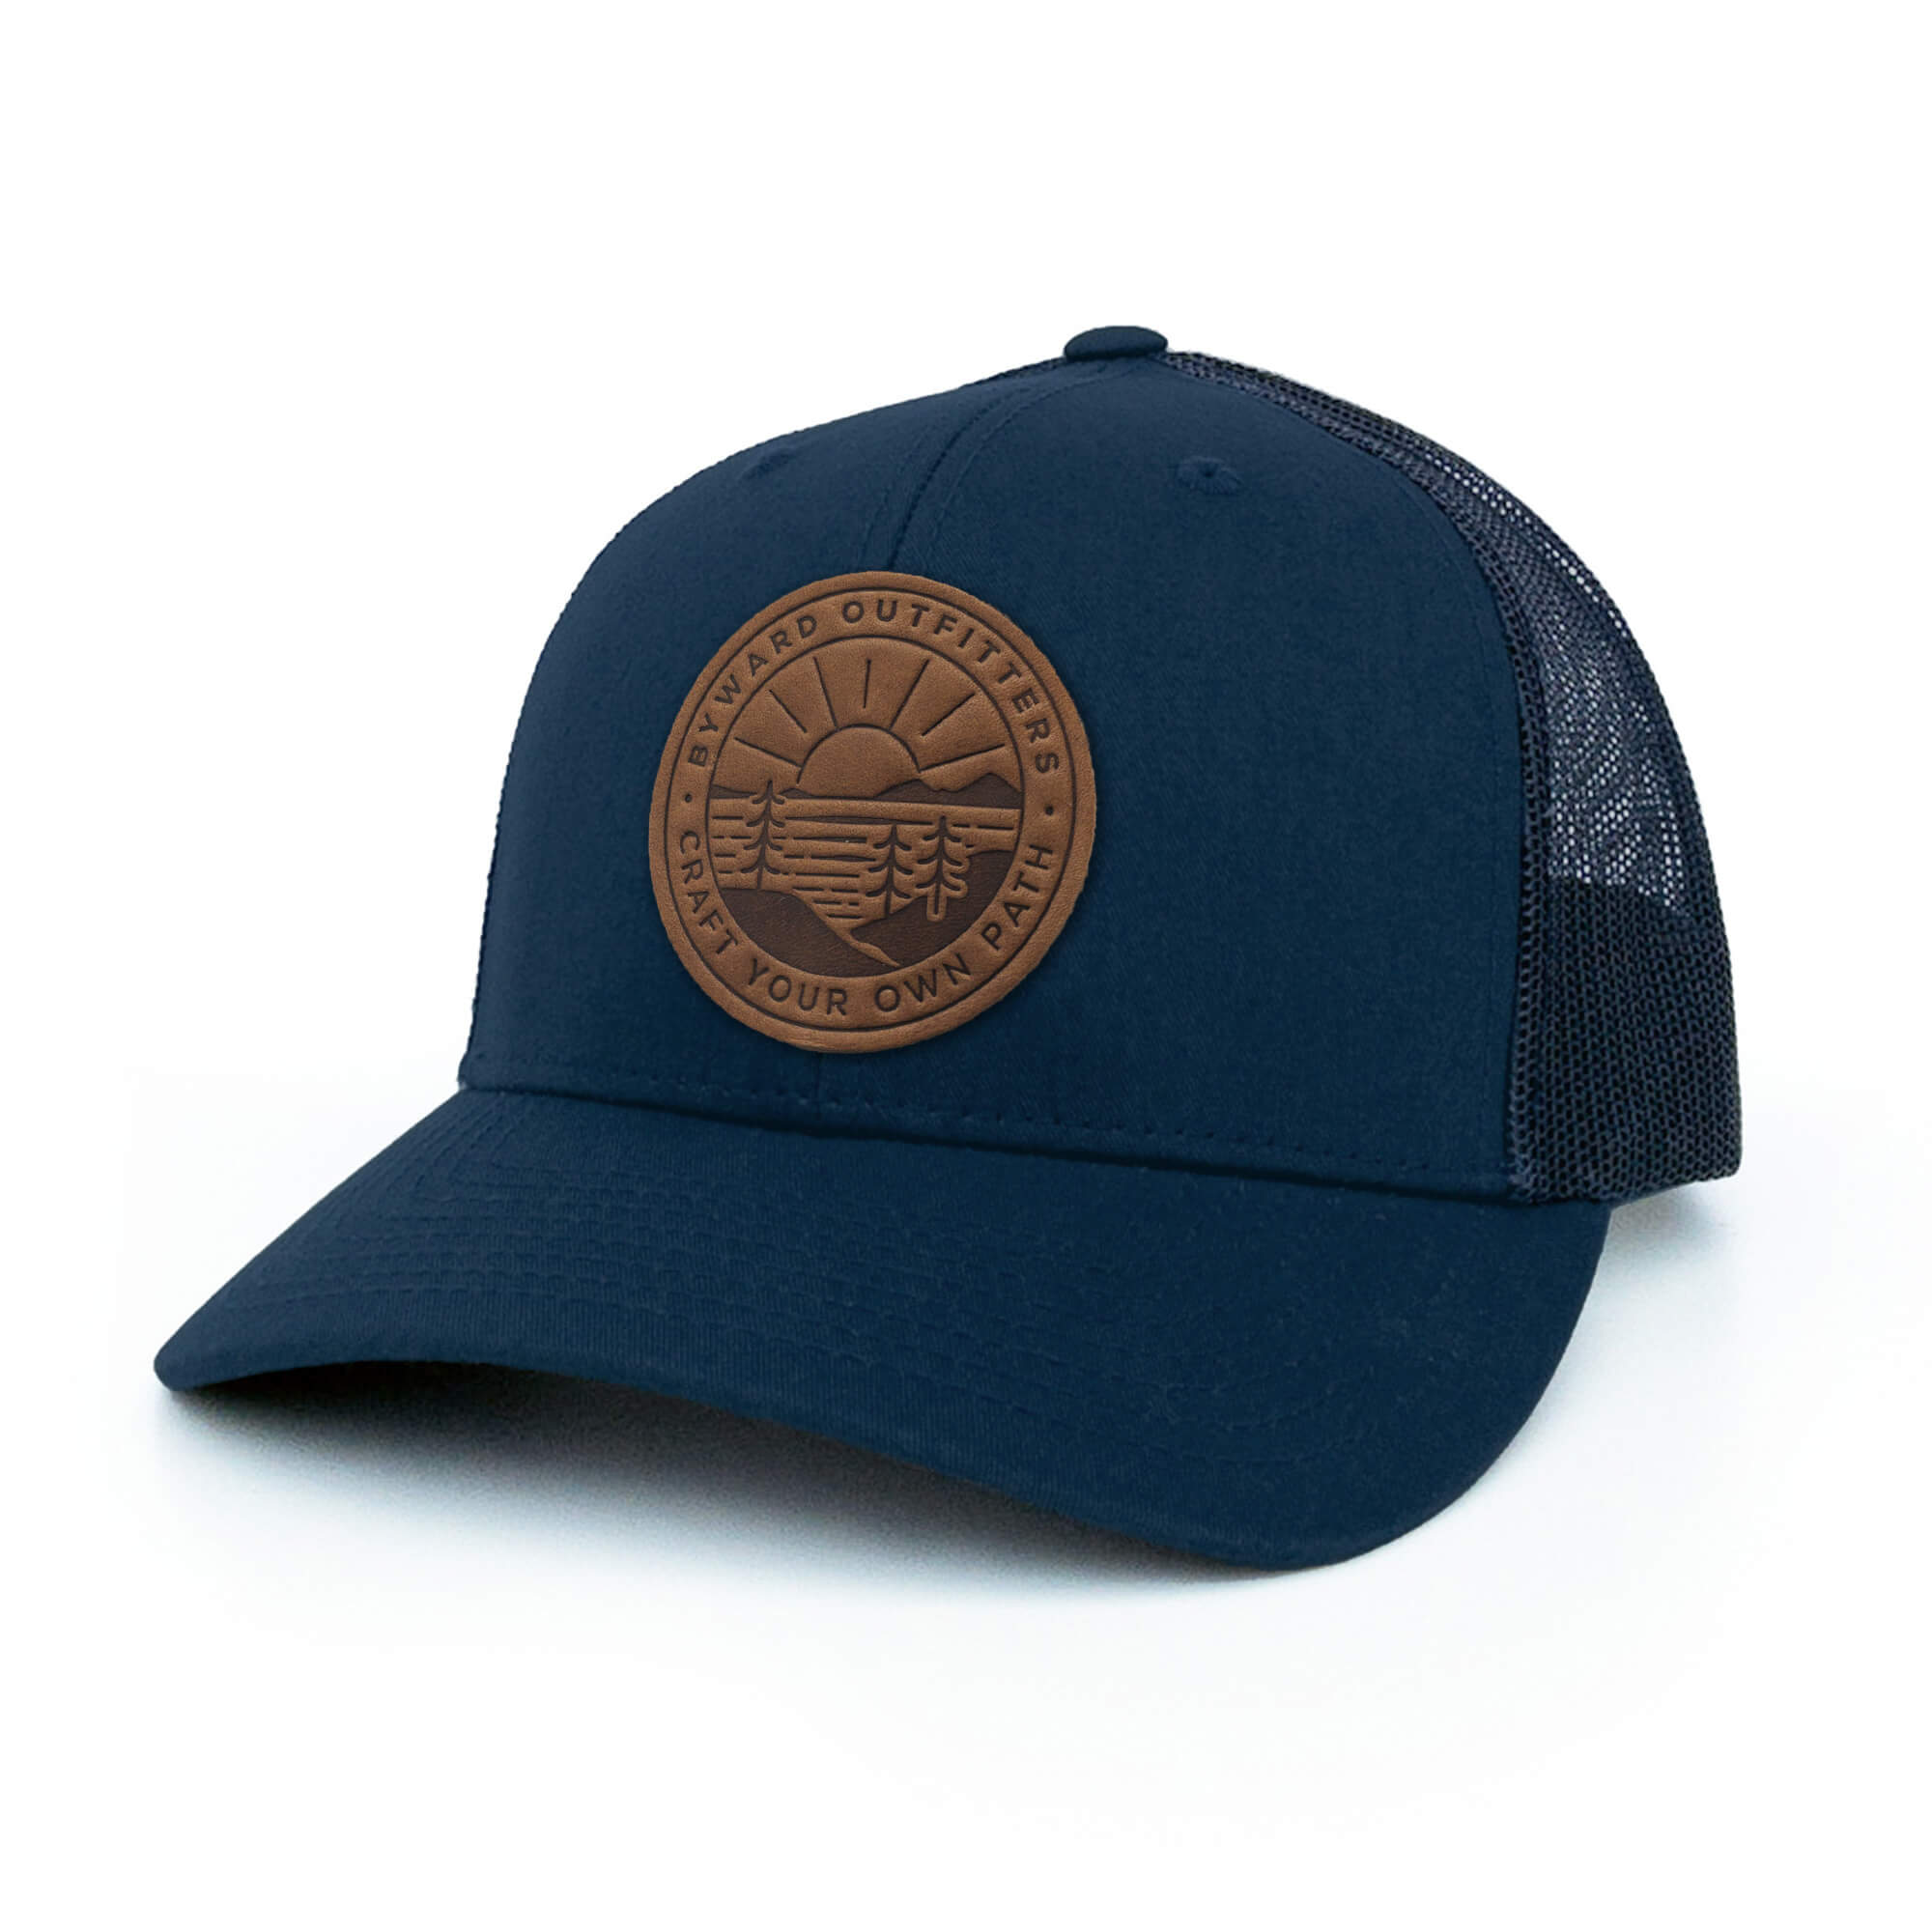 Navy trucker hat with full-grain leather patch of Scenic Sunrise | BLACK-005-002, CHARC-005-002, NAVY-005-002, HGREY-005-002, MOSS-005-002, BROWN-005-002